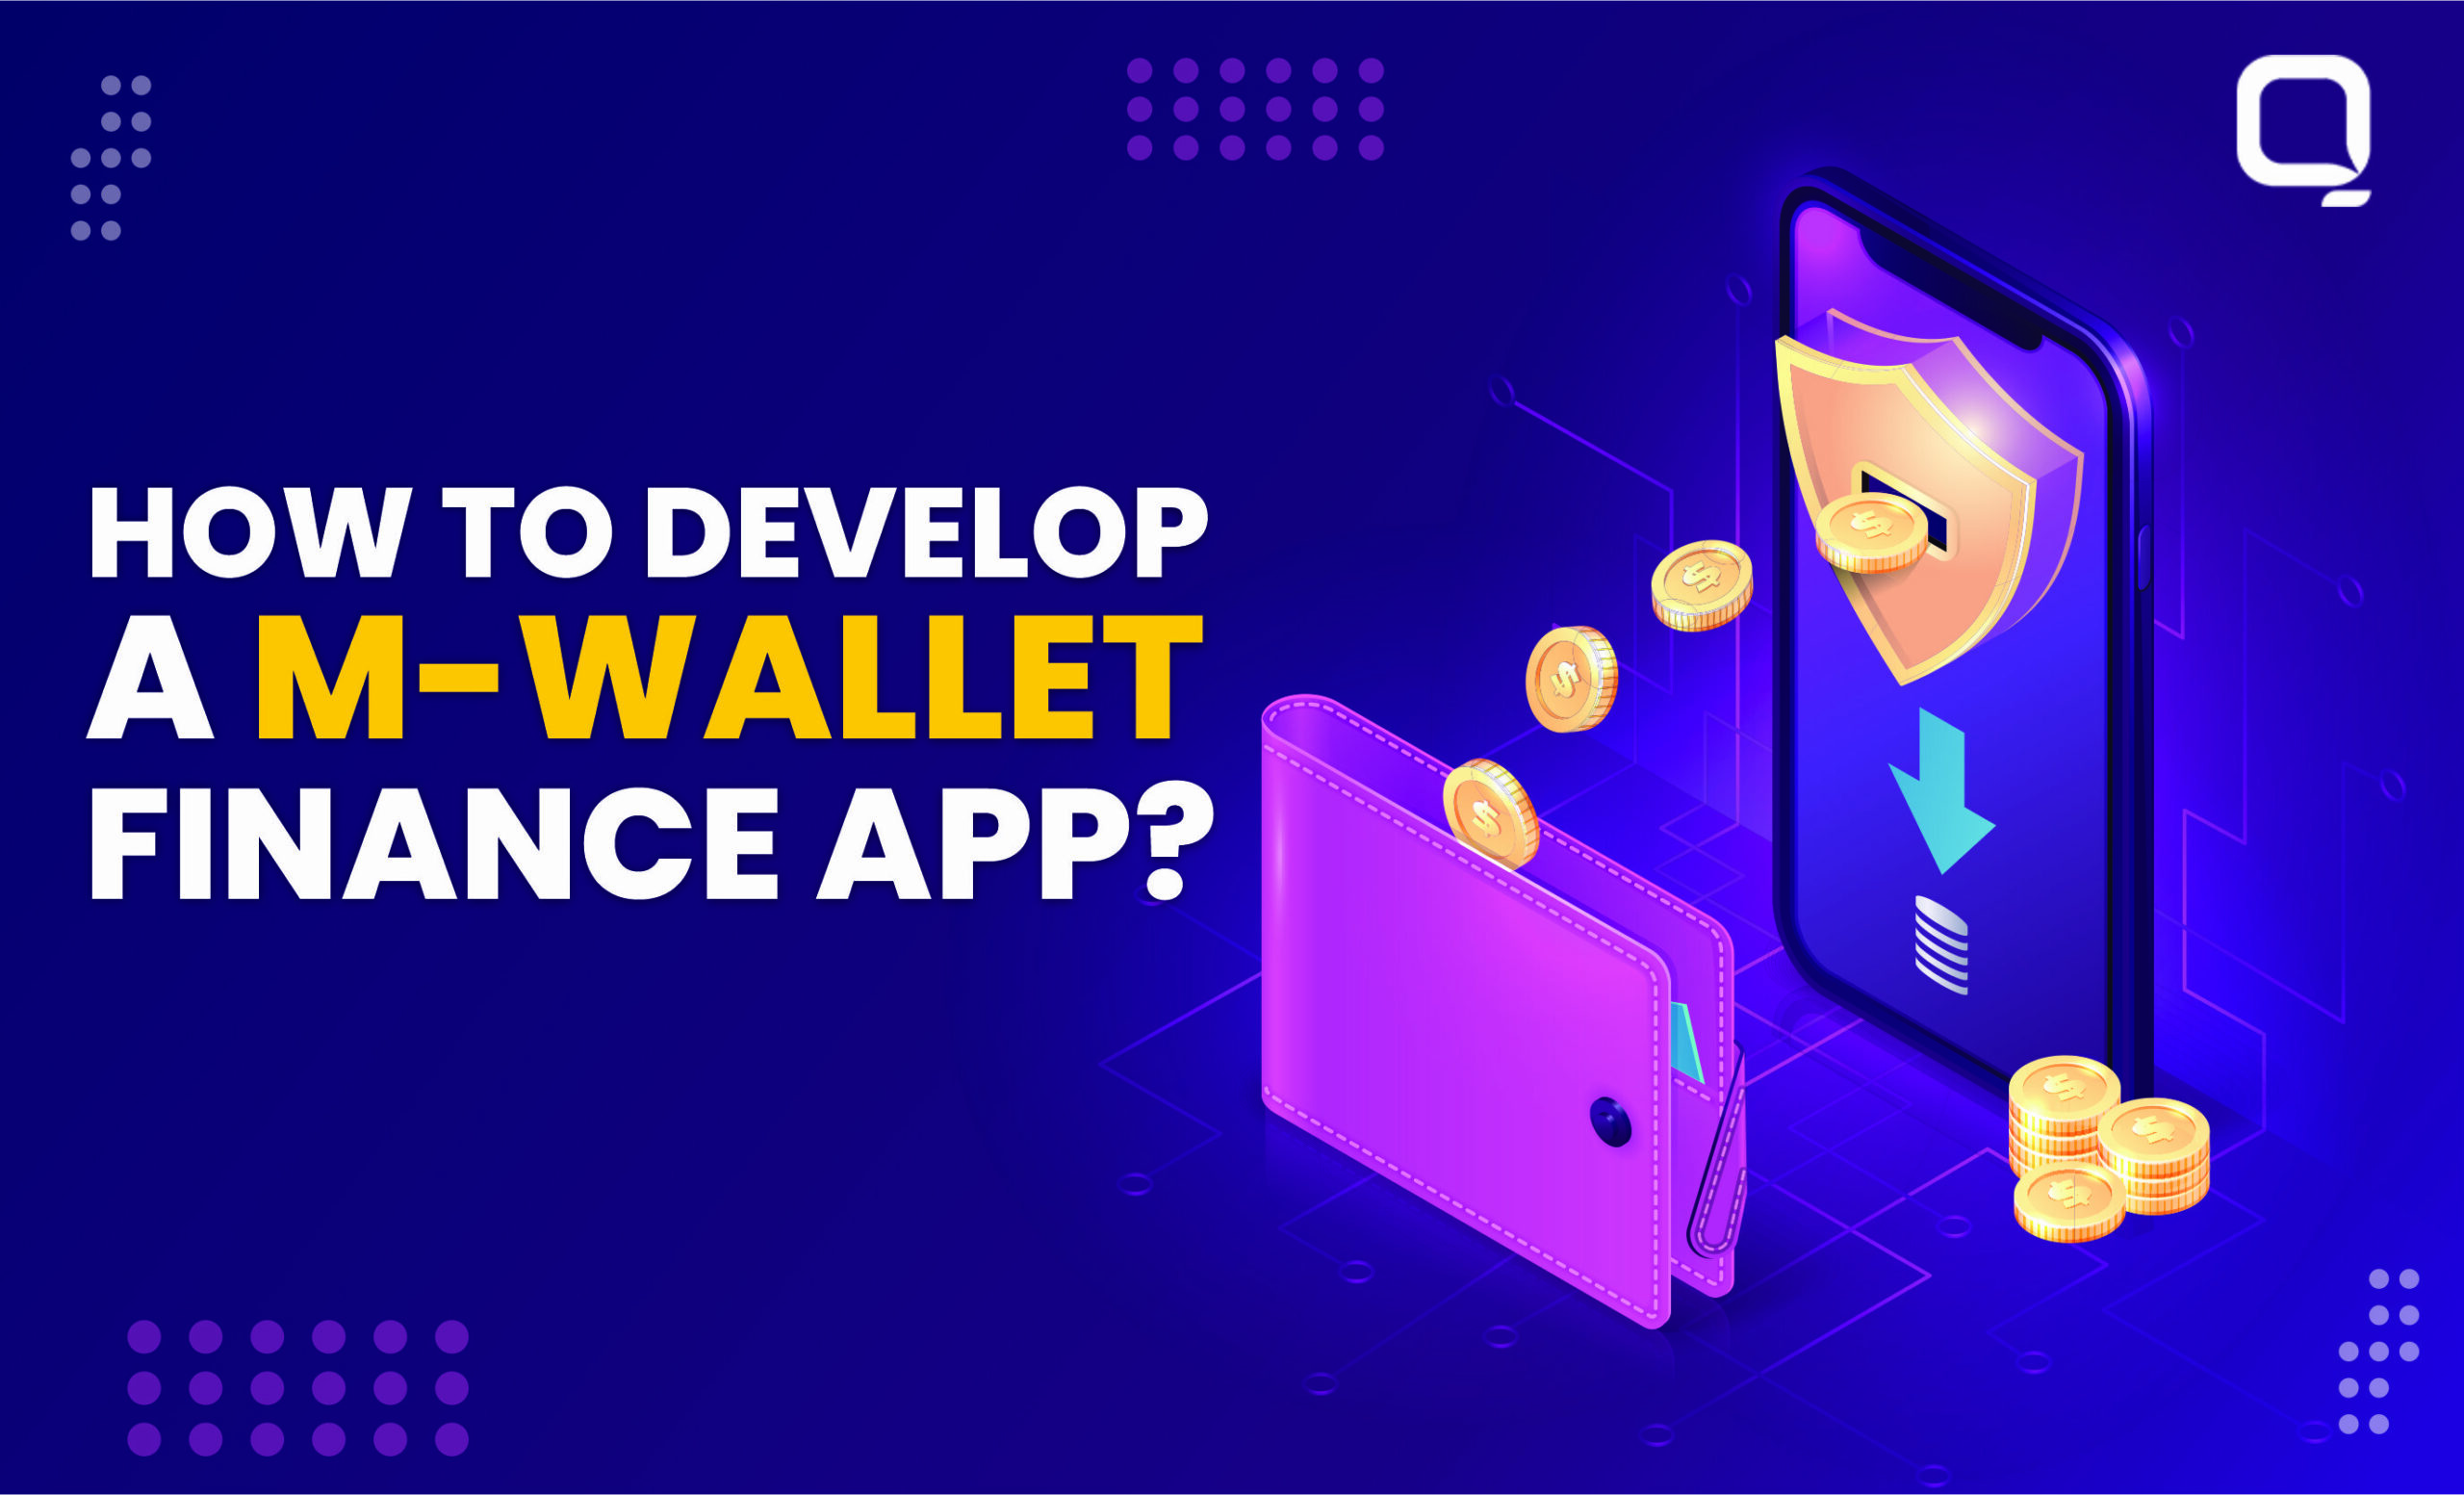 How to Develop a M-Wallet Finance App? (Step-by-Step)